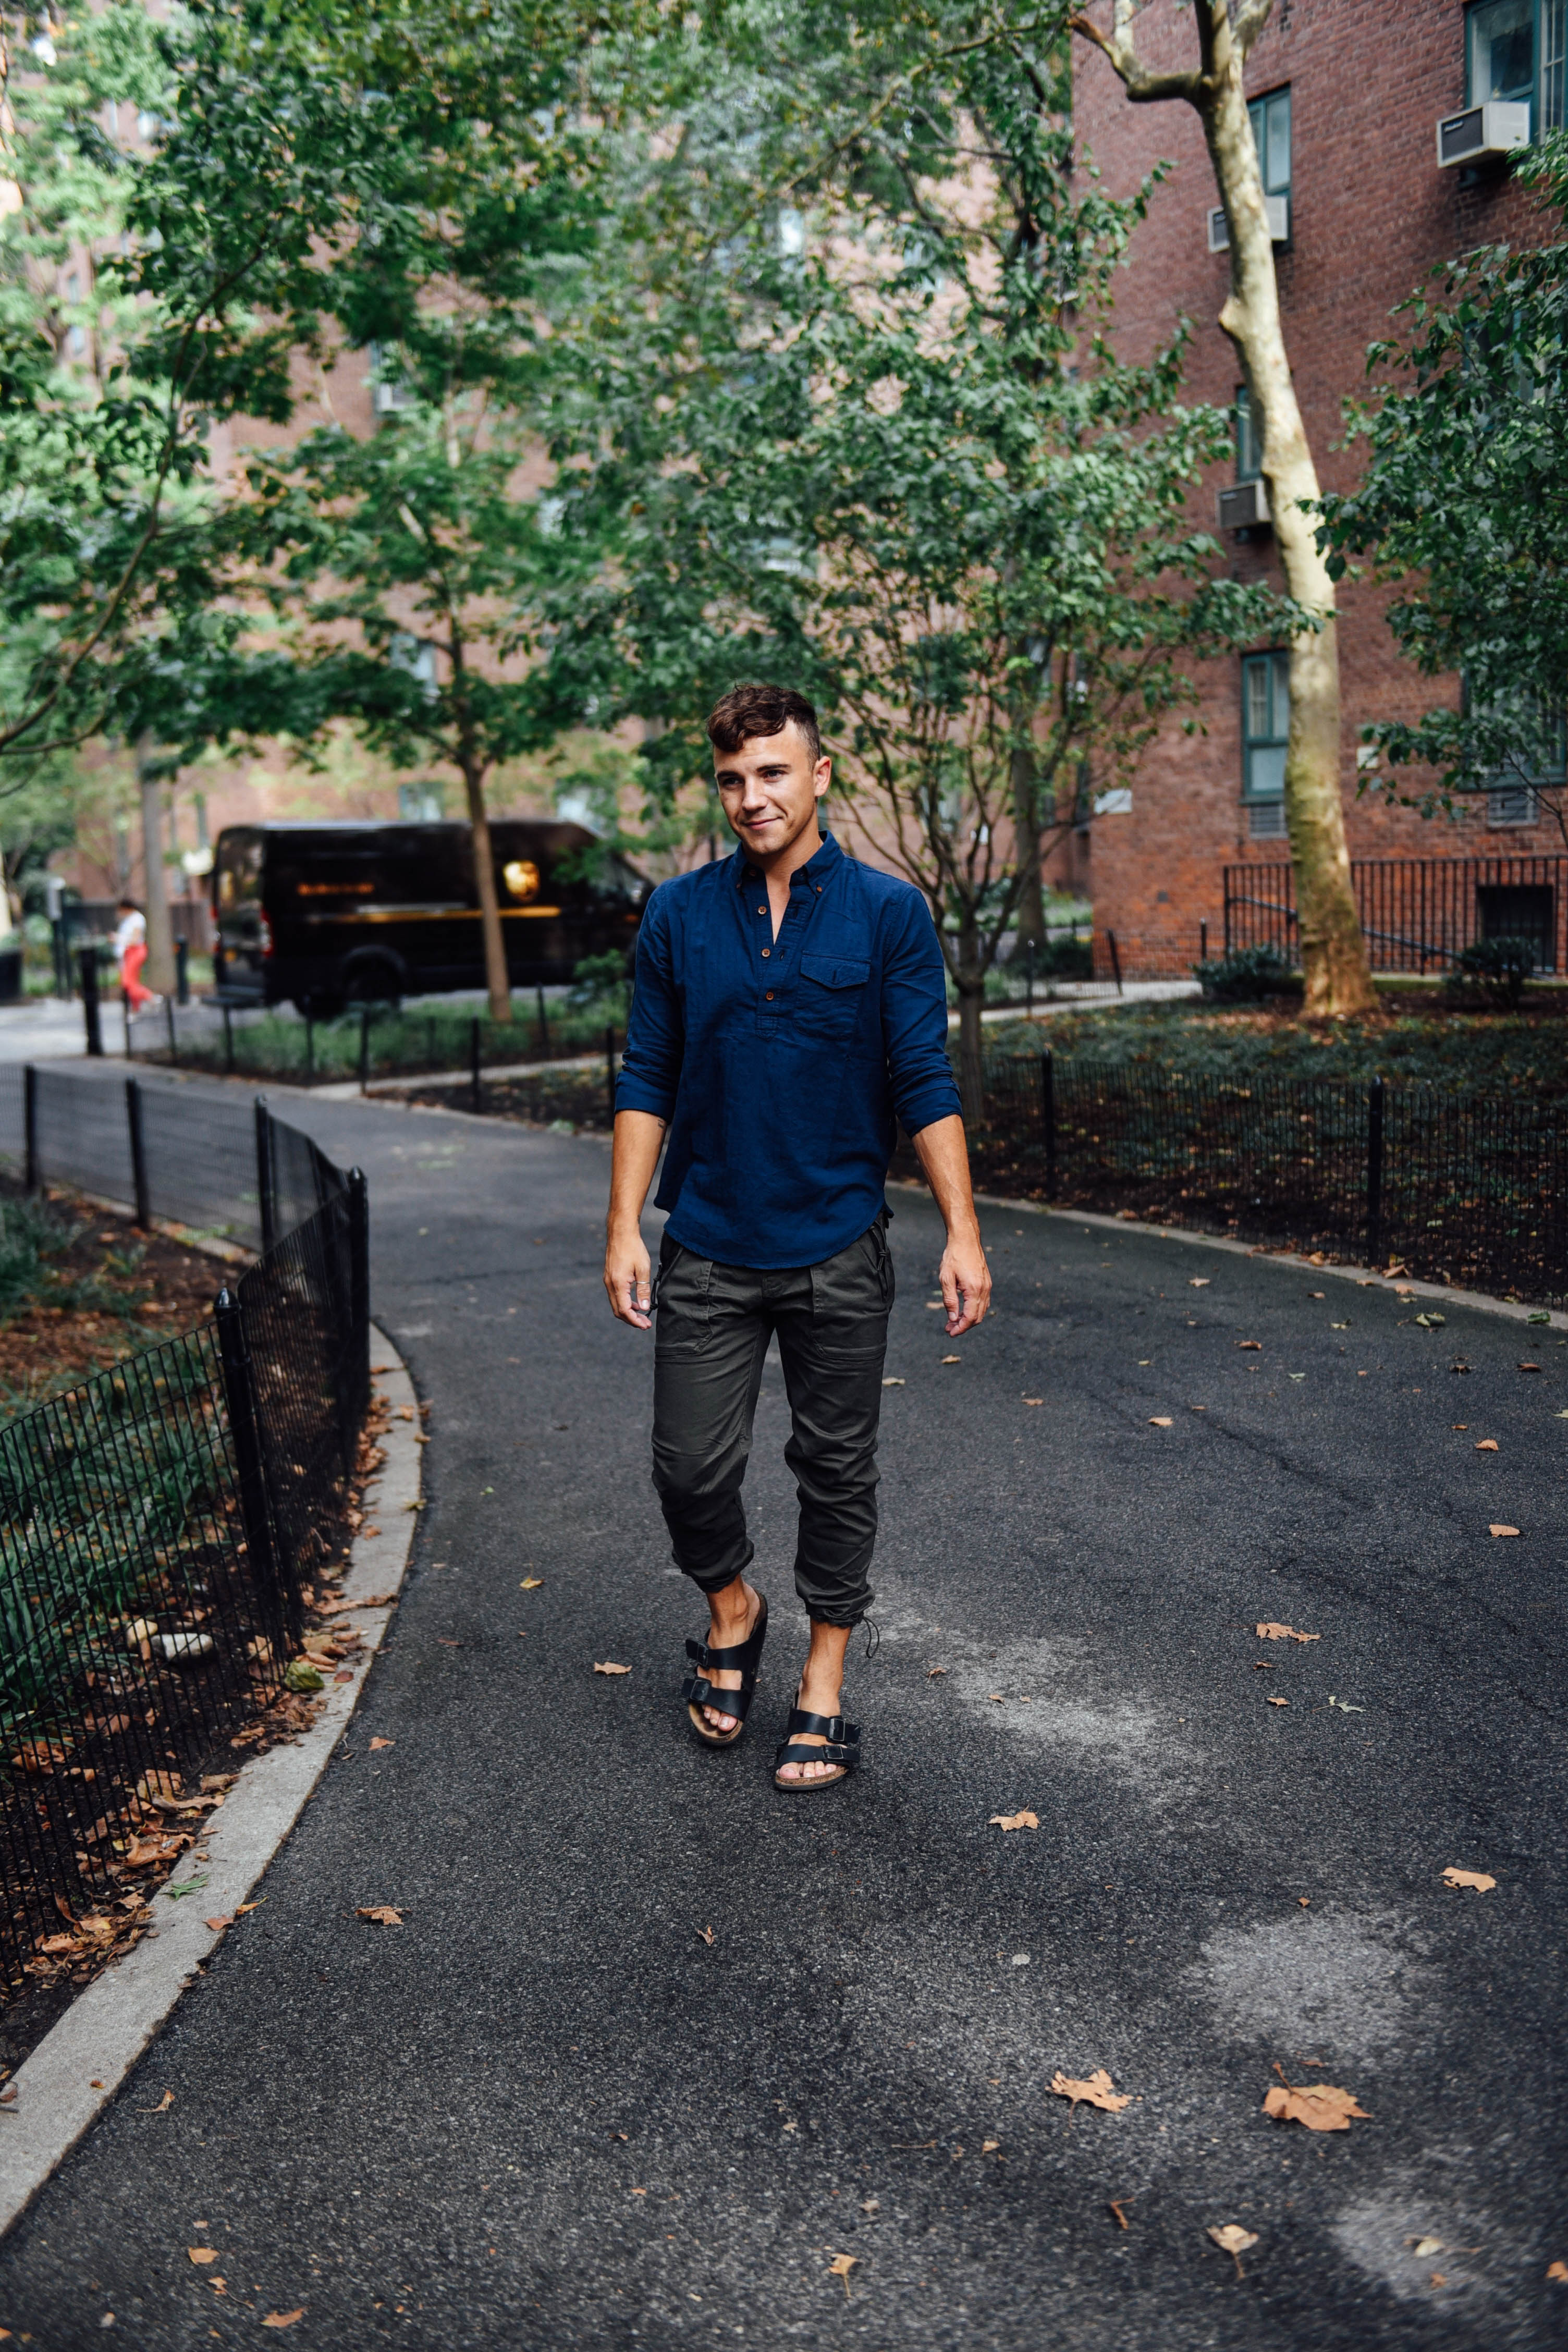 Men's Fashion and Lifestyle Blogger Justin Livingston wearing Abercrombie & Fitch Men's Paratrooper Pants and Popover Shirt in New York City